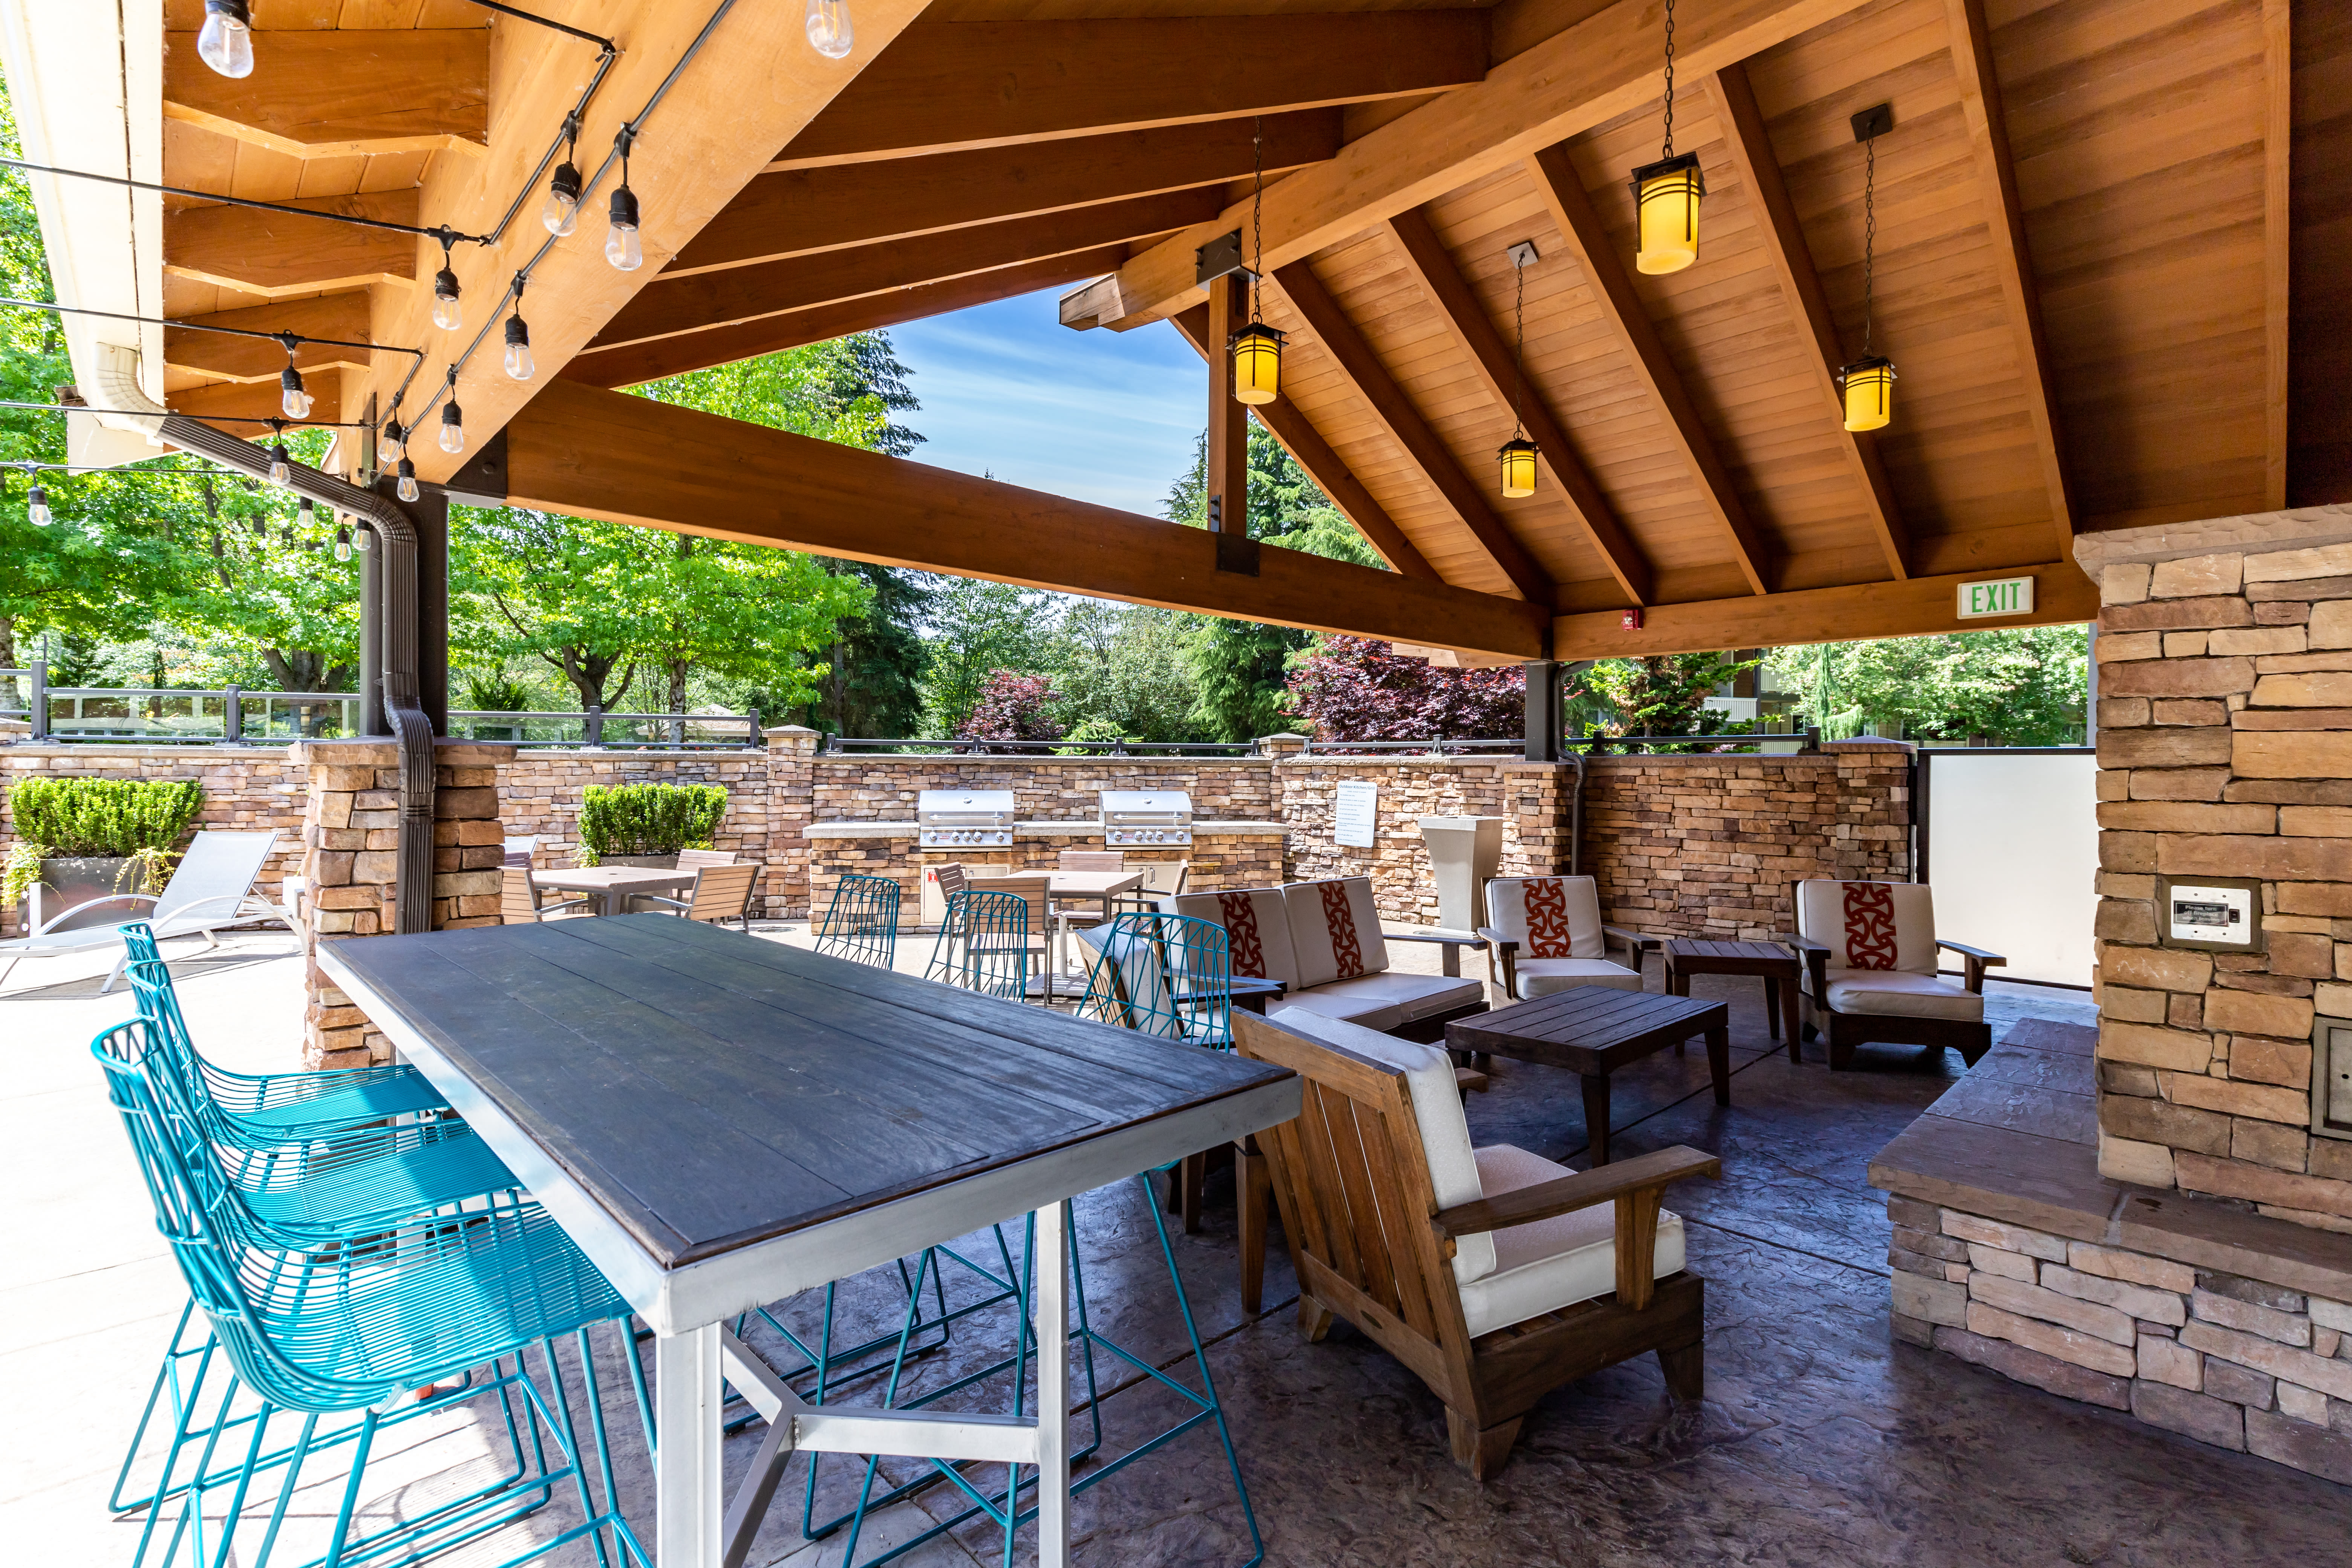 Poolside lounge area at The Preserve at Forbes Creek in Kirkland, Washington